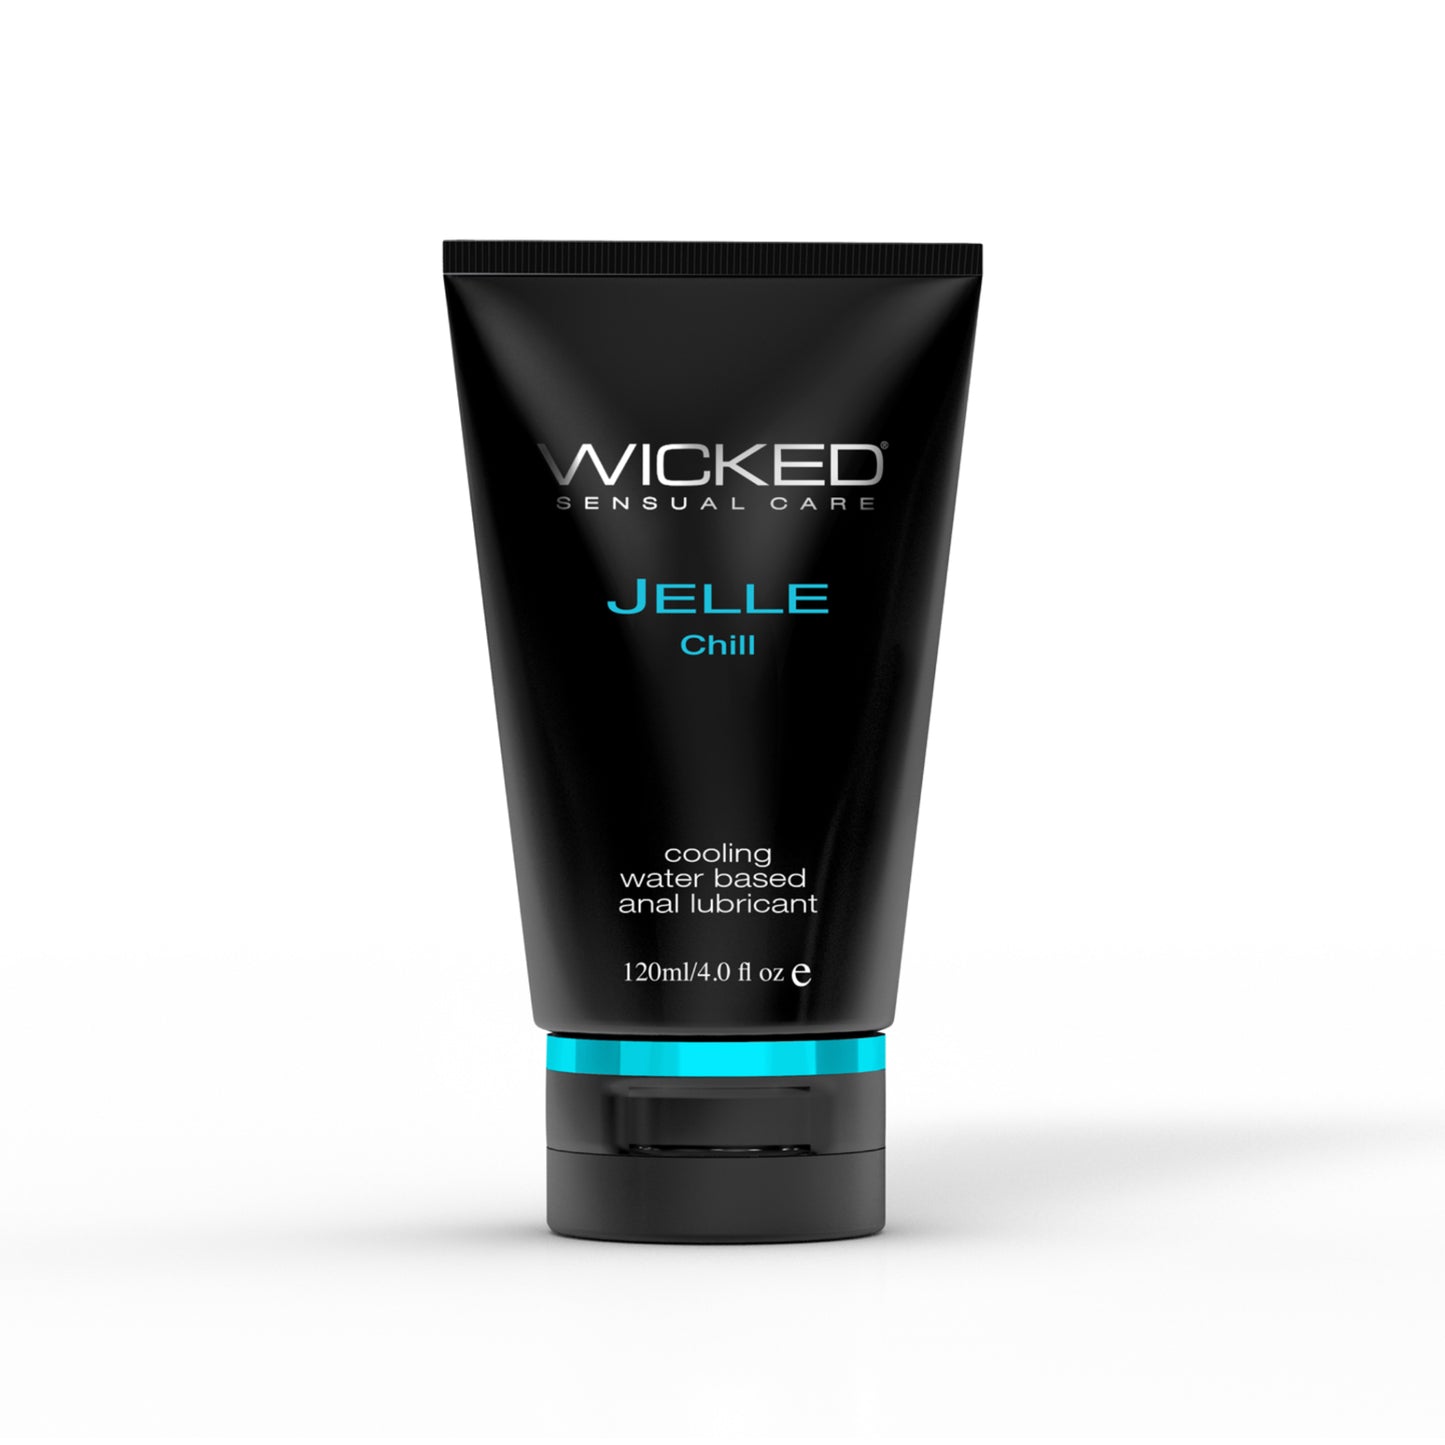 Wicked - Cooling Water Based Anal Gel Lubricant | Jelle Chill